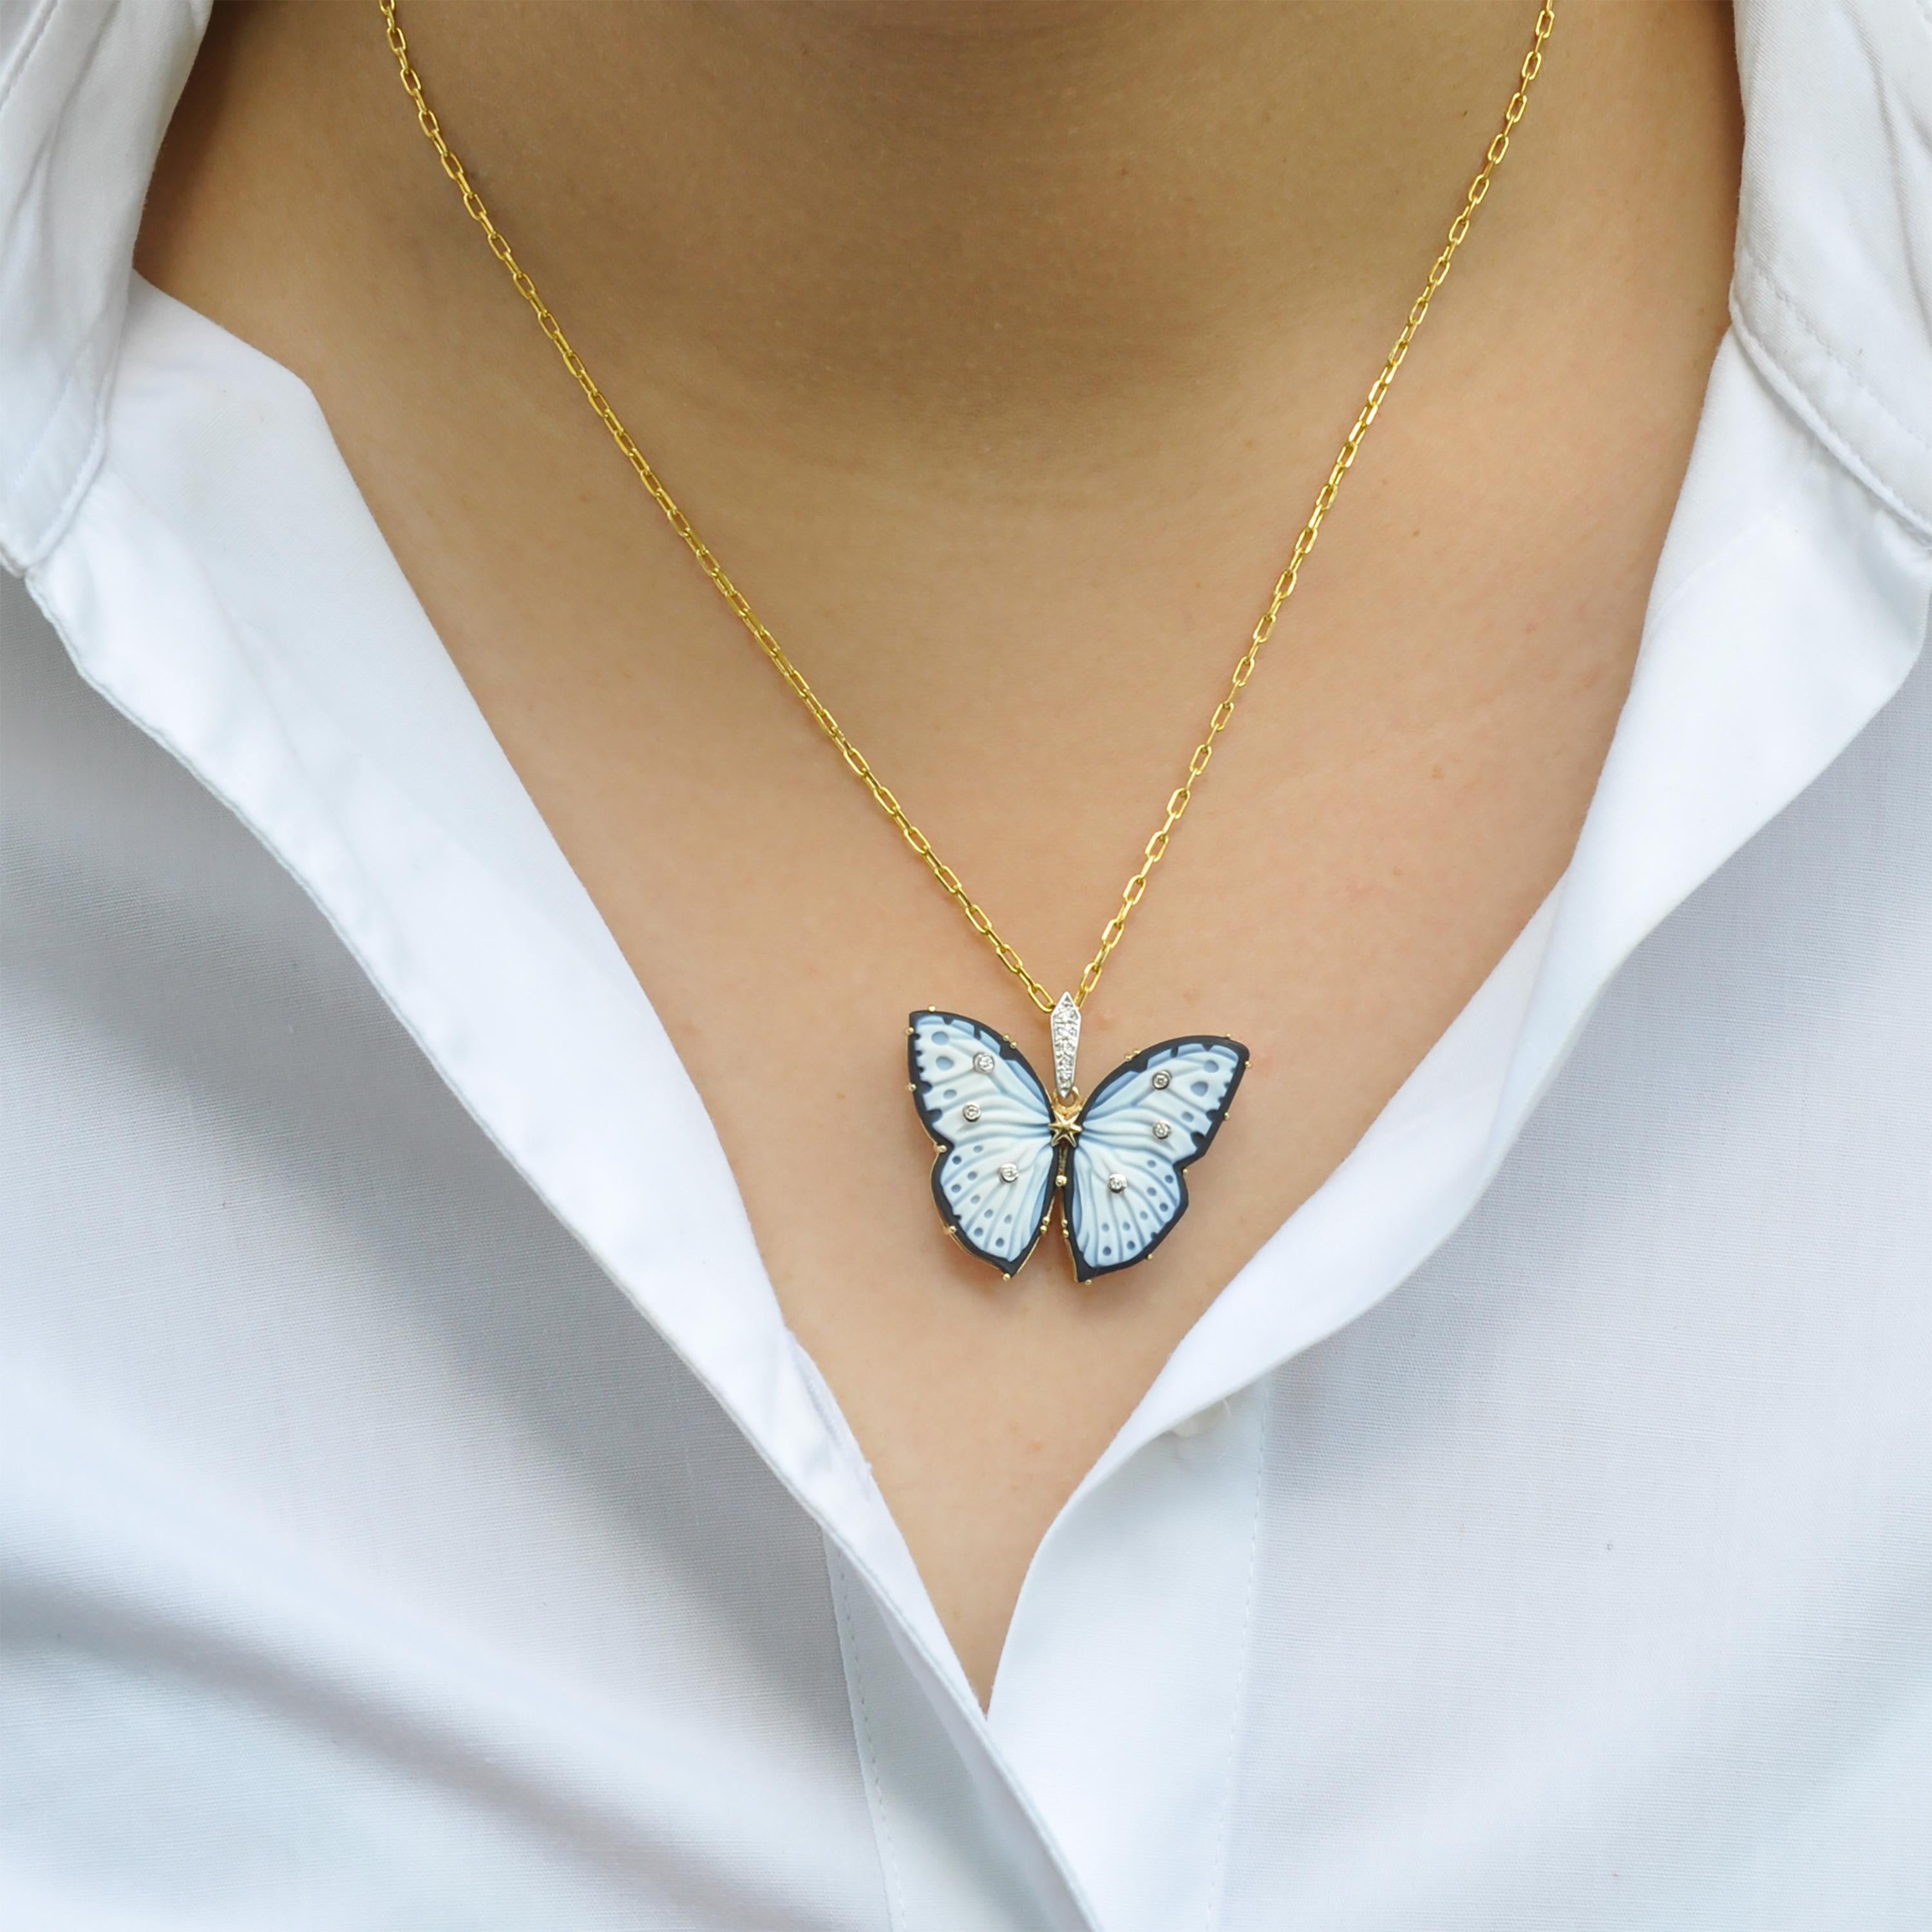 The One of a Kind 18 Karat Yellow Gold Butterfly Hand-Carved Agate with Diamonds Pendant Necklace is a truly exceptional piece of jewelry. The pendant features a stunning butterfly design, meticulously hand-carved from natural agate.

The agate used